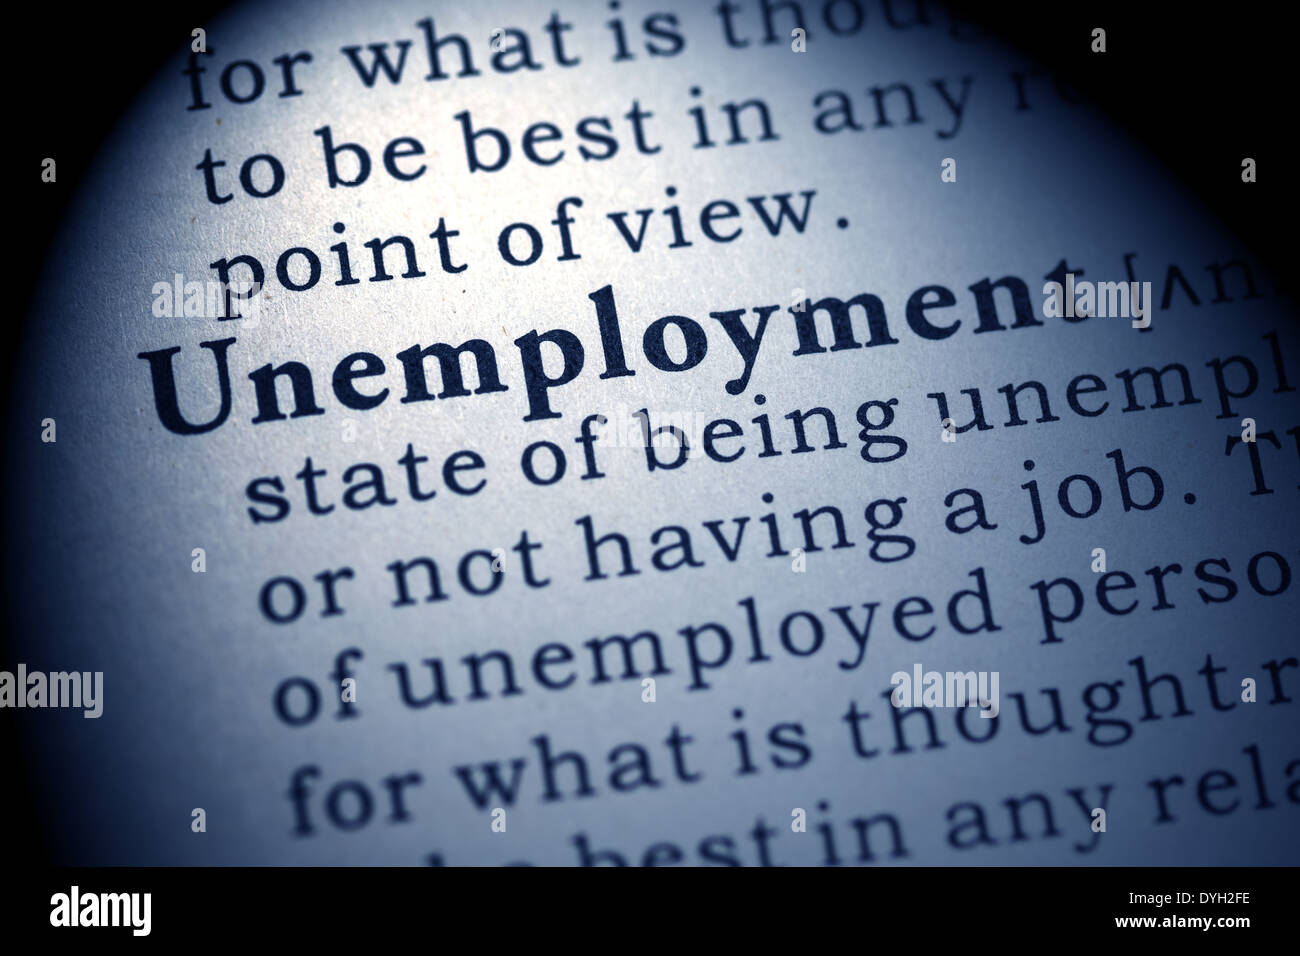 Fake Dictionary, Dictionary definition of the word unemployment. Stock Photo